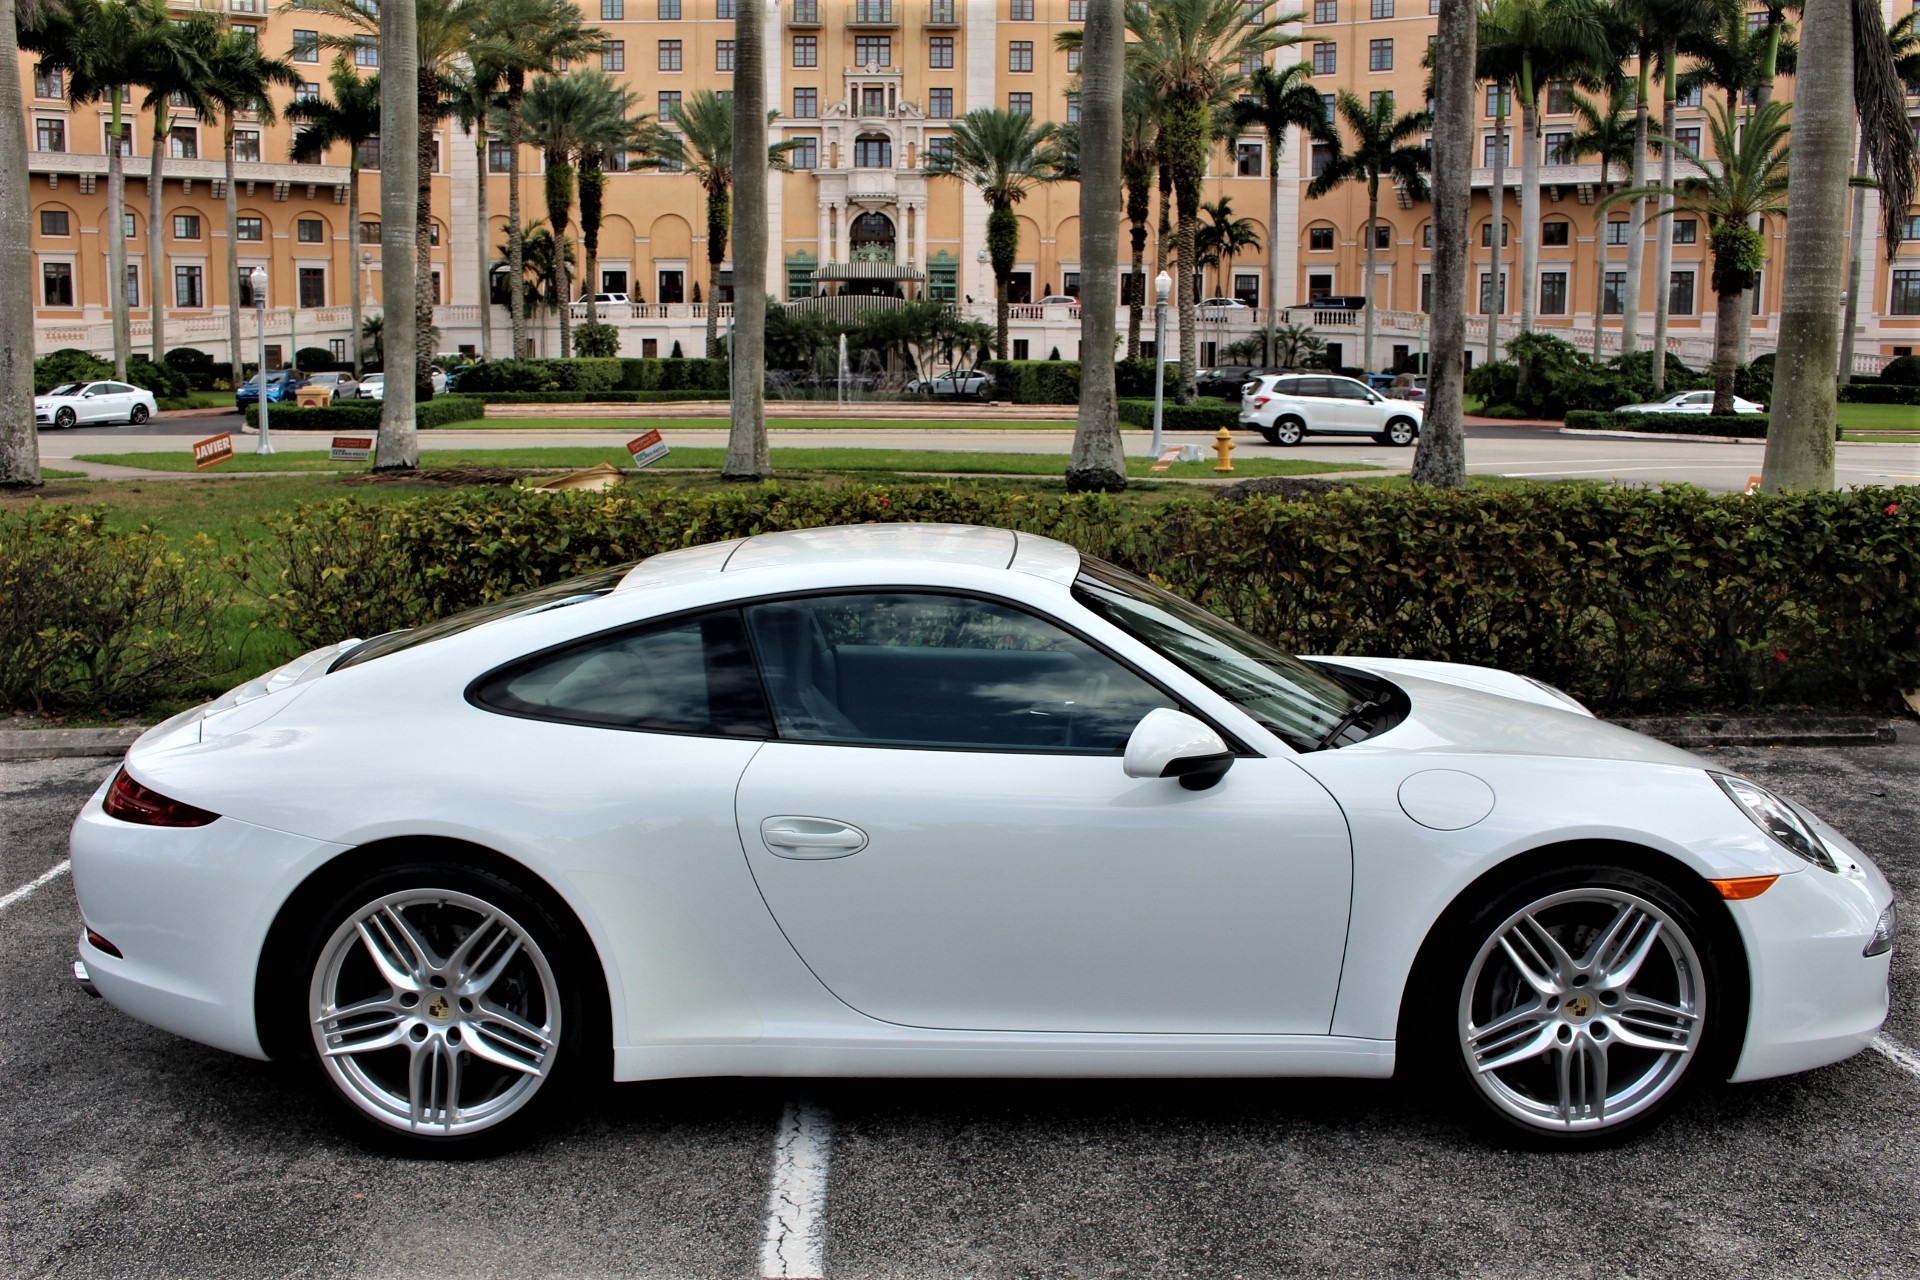 Used 2013 Porsche 911 Carrera for sale Sold at The Gables Sports Cars in Miami FL 33146 2